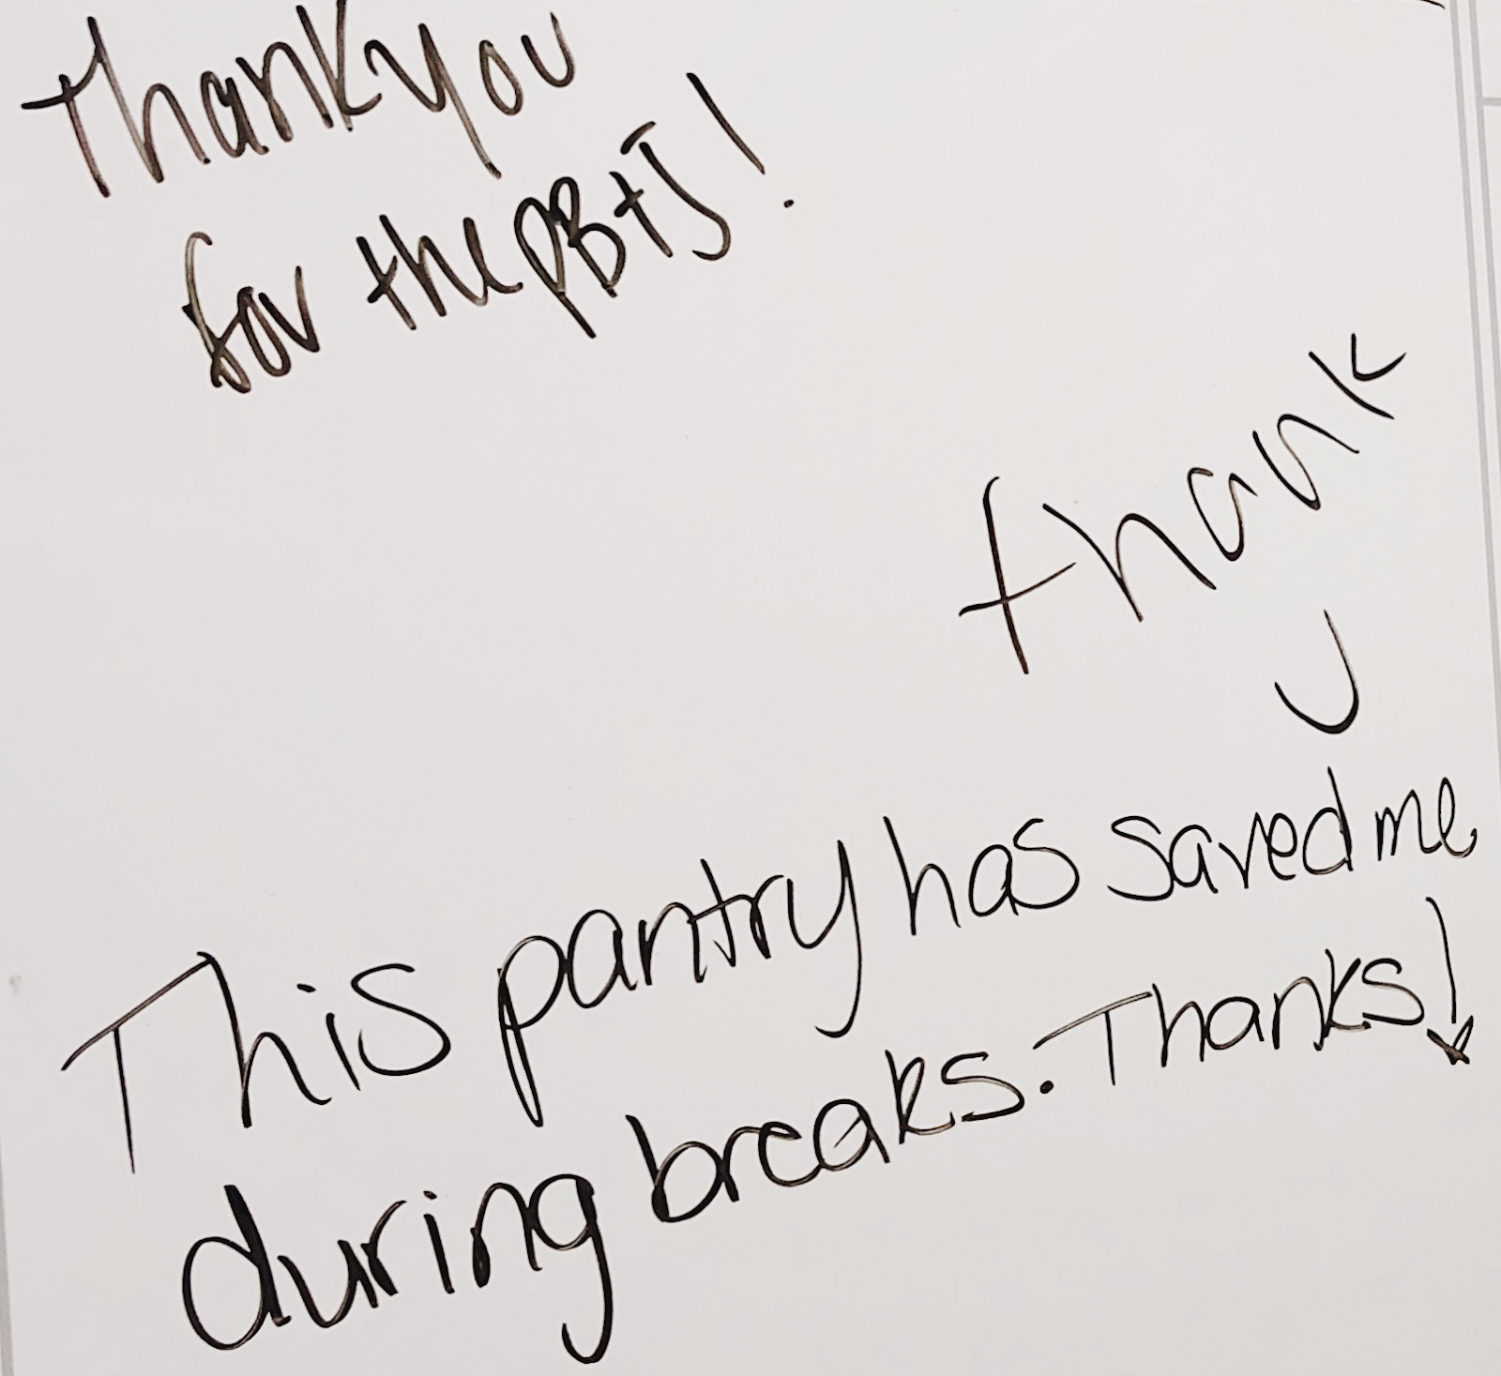  Students leave thank you notes on the whiteboard behind the door in Mo’s Cupboard.